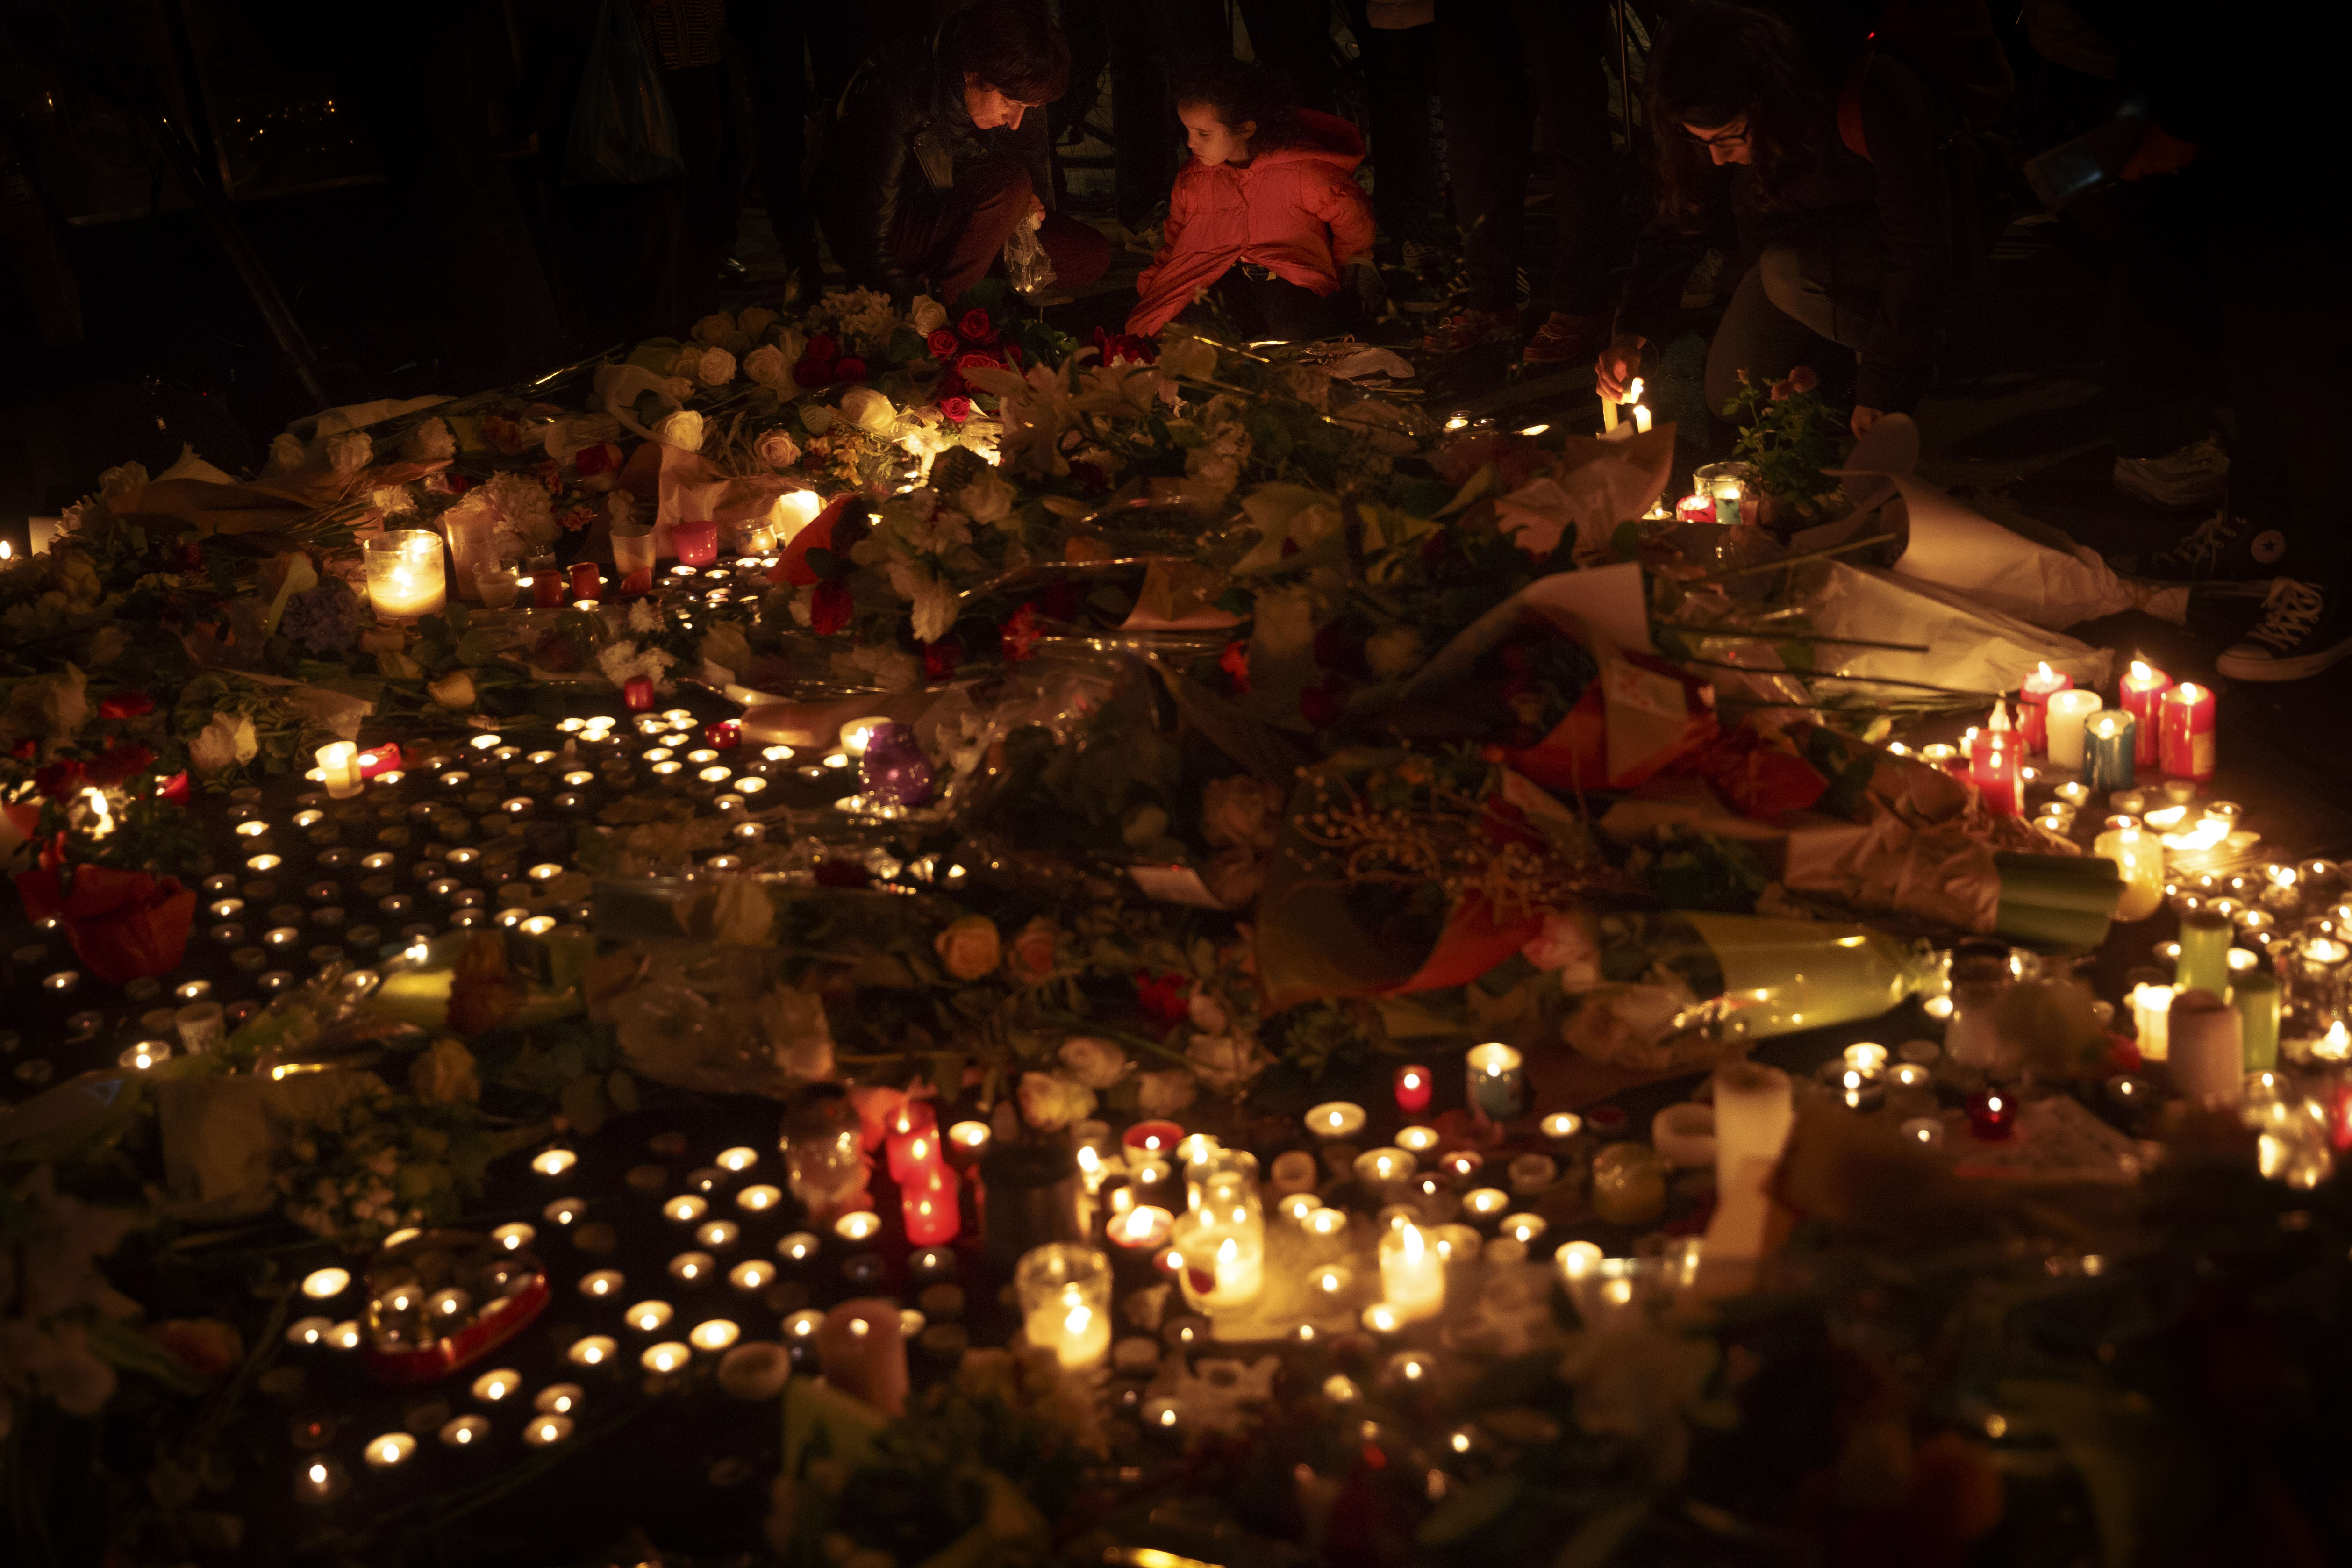 People light candles while outside The Belle Equipe restaurant in Paris, Saturday, Nov. 14, 2015, a day after the attacks on Paris. French President Francois Hollande vowed to attack Islamic State without mercy as the jihadist group admitted responsibility Saturday for orchestrating the deadliest attacks inflicted on France since World War II. (AP Photo/Daniel Ochoa de Olza)